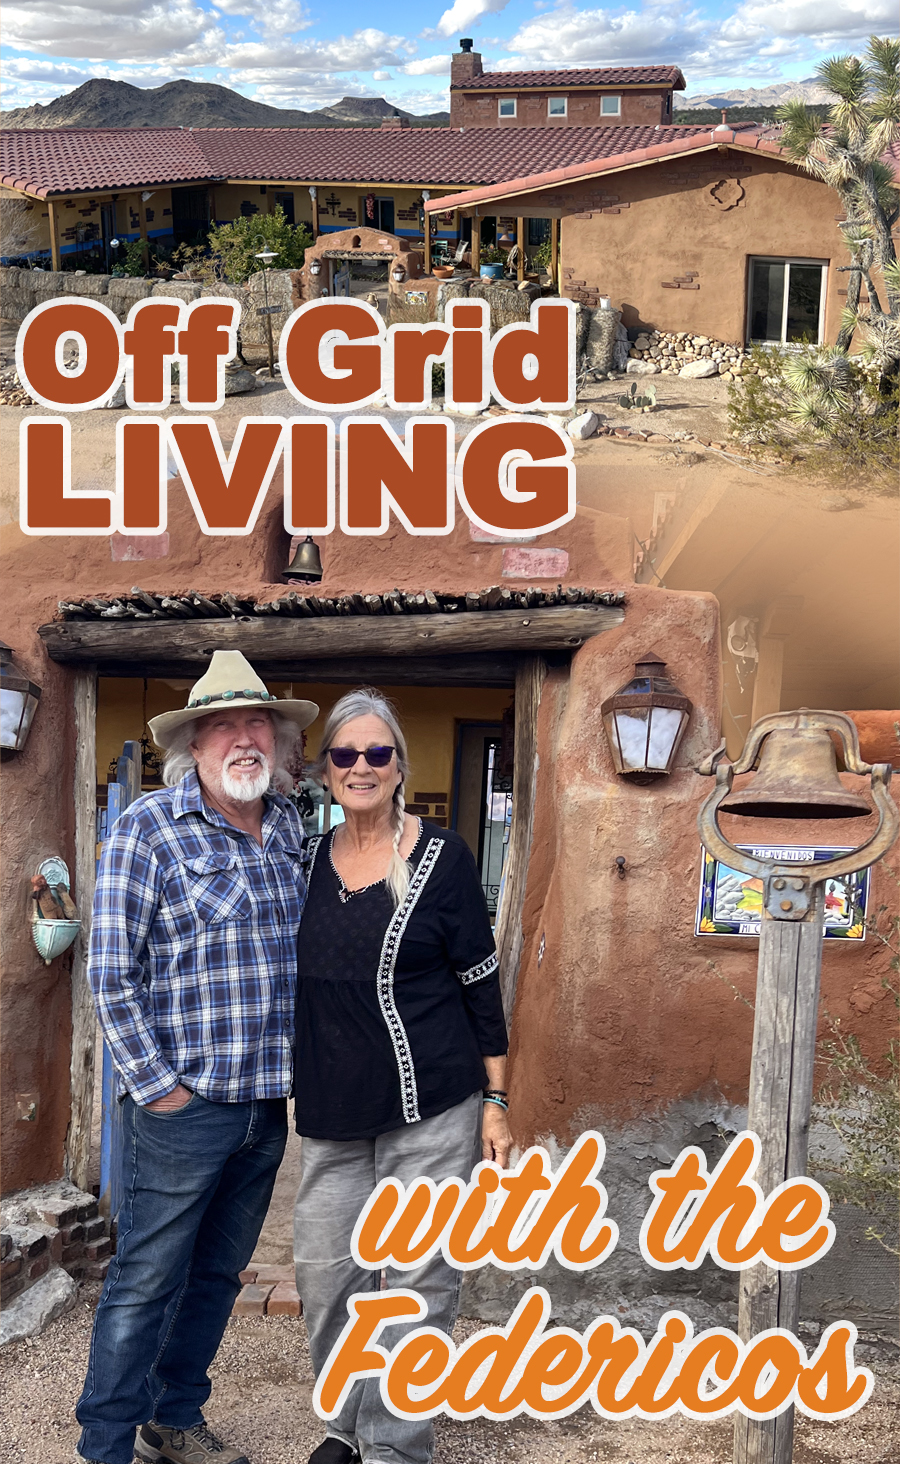 An Artistic Retreat – Perfect for Off Grid Living!